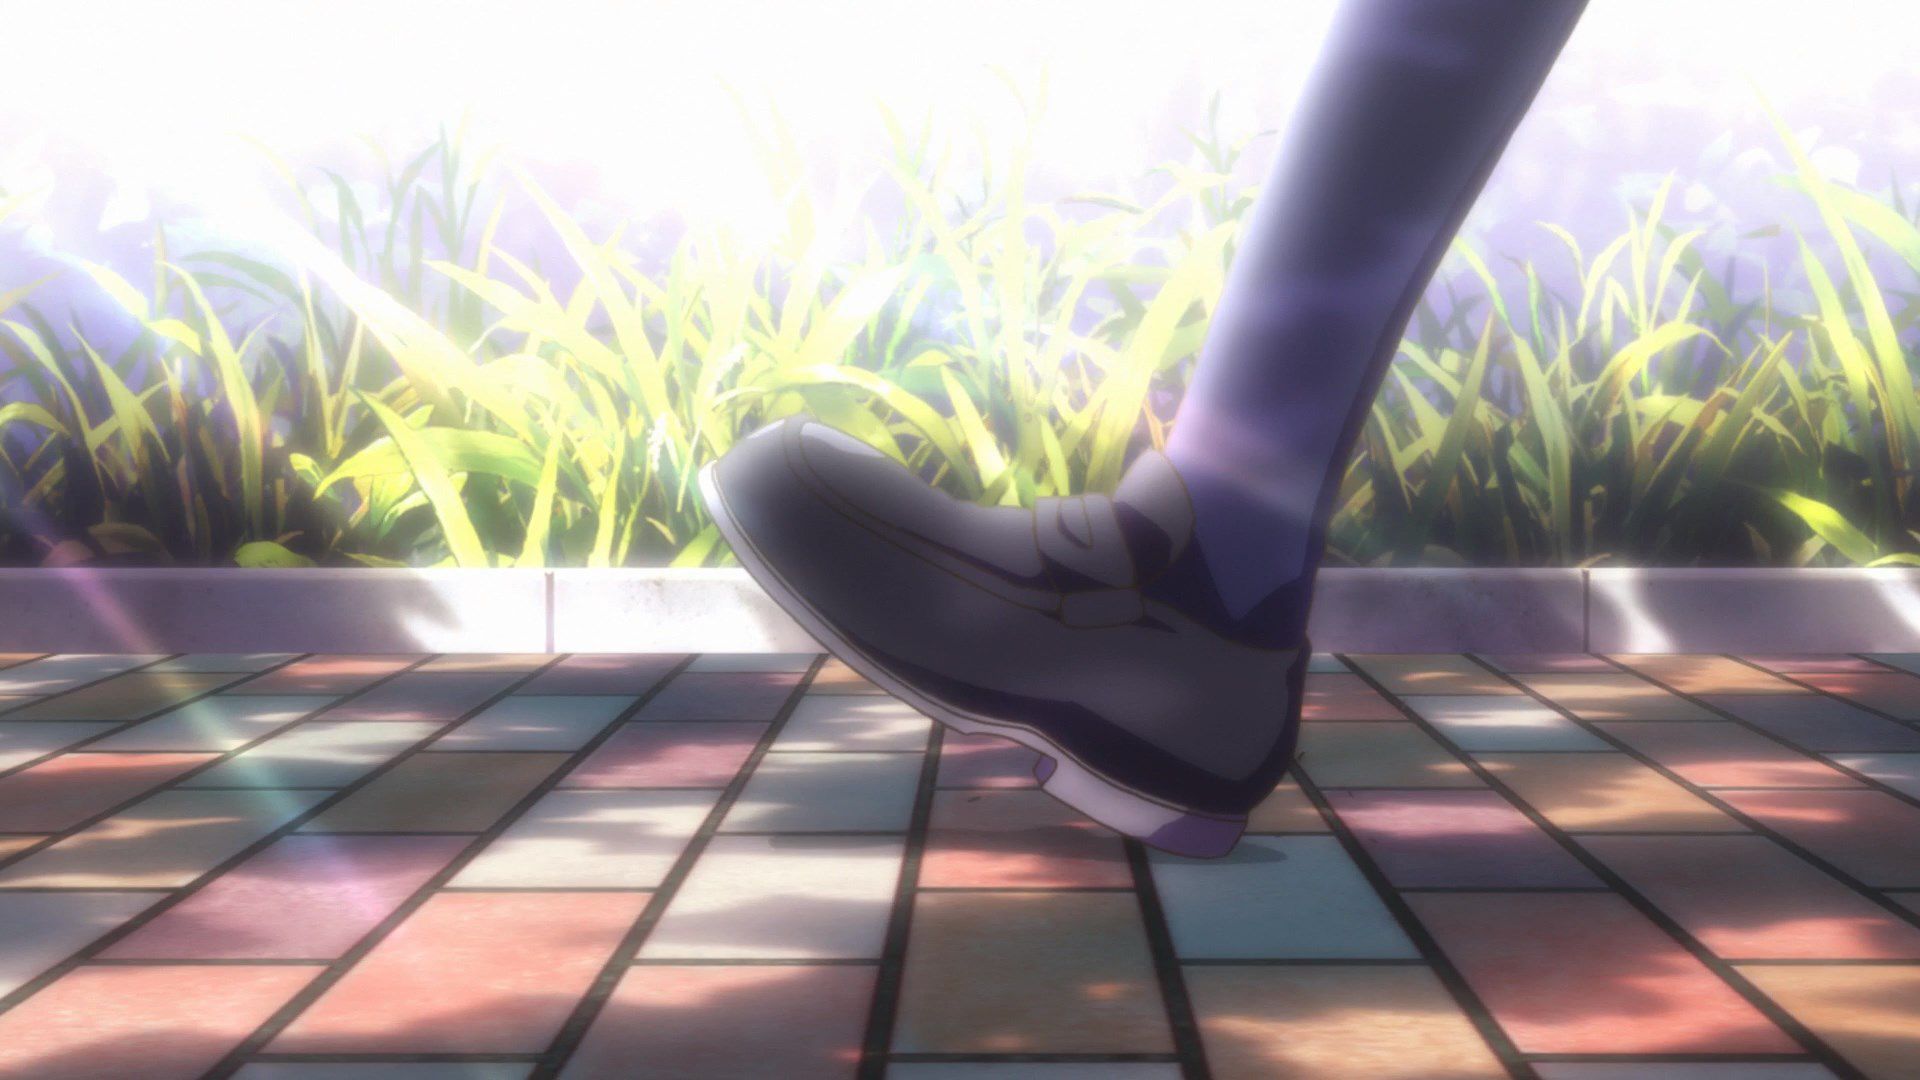 [God images] "love live! ' Μm ' PV's leg is too erotic everyone wakes up to a leg fetish of wwwww 83